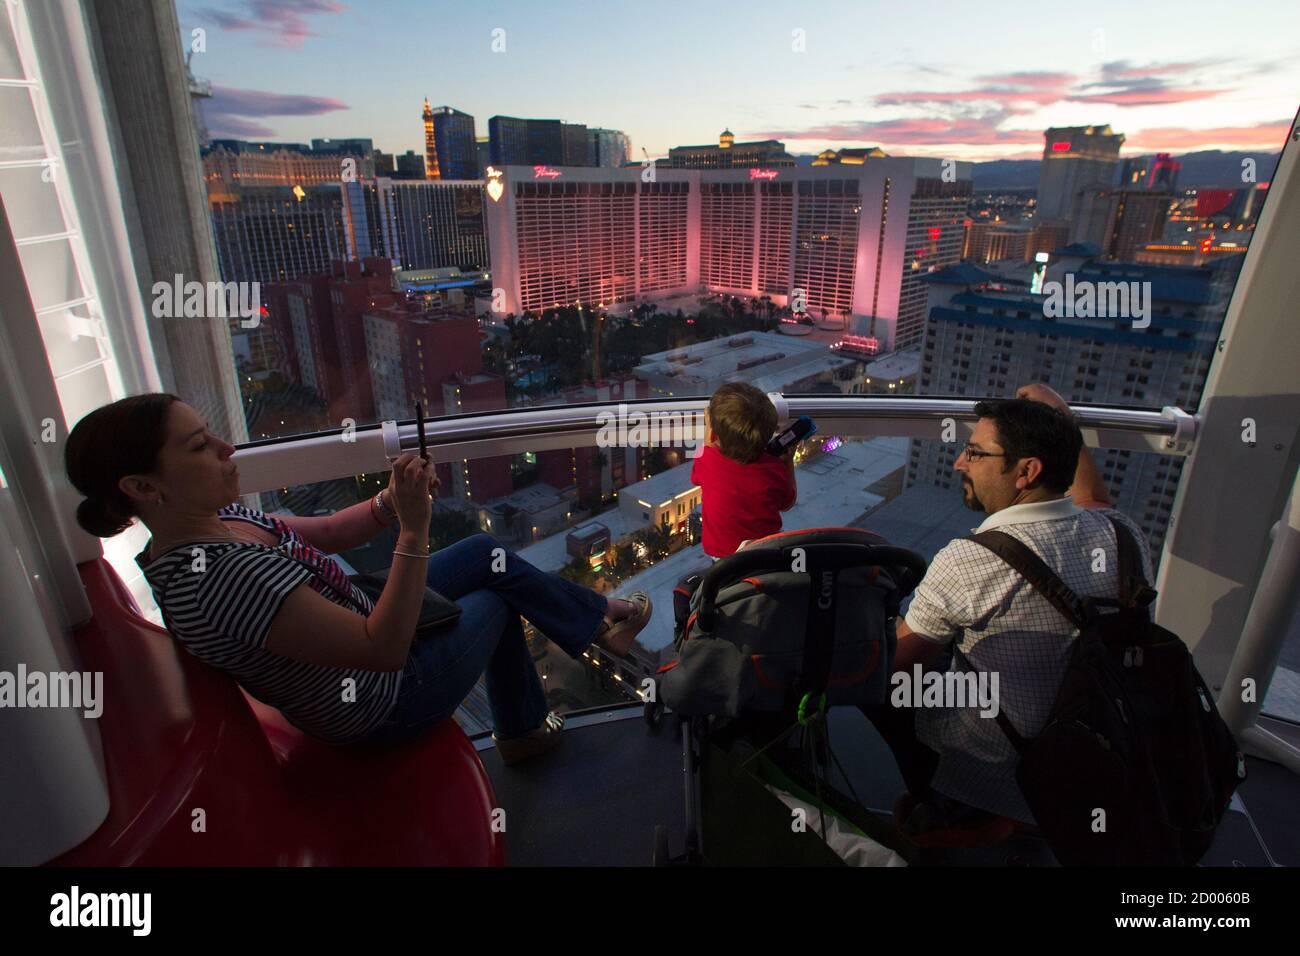 Carolina Higuera (L) of Mexico takes a photo of her son and husband while riding the 550 foot-tall (167.6 m) High Roller observation wheel, the tallest in the world, in Las Vegas, Nevada April 9, 2014. The wheel is the centerpiece of the $550 million Linq project, a retail, dining and entertainment district by Caesars Entertainment Corp. REUTERS/Las Vegas Sun/Steve Marcus (UNITED STATES - Tags: TRAVEL BUSINESS SOCIETY) Stock Photo